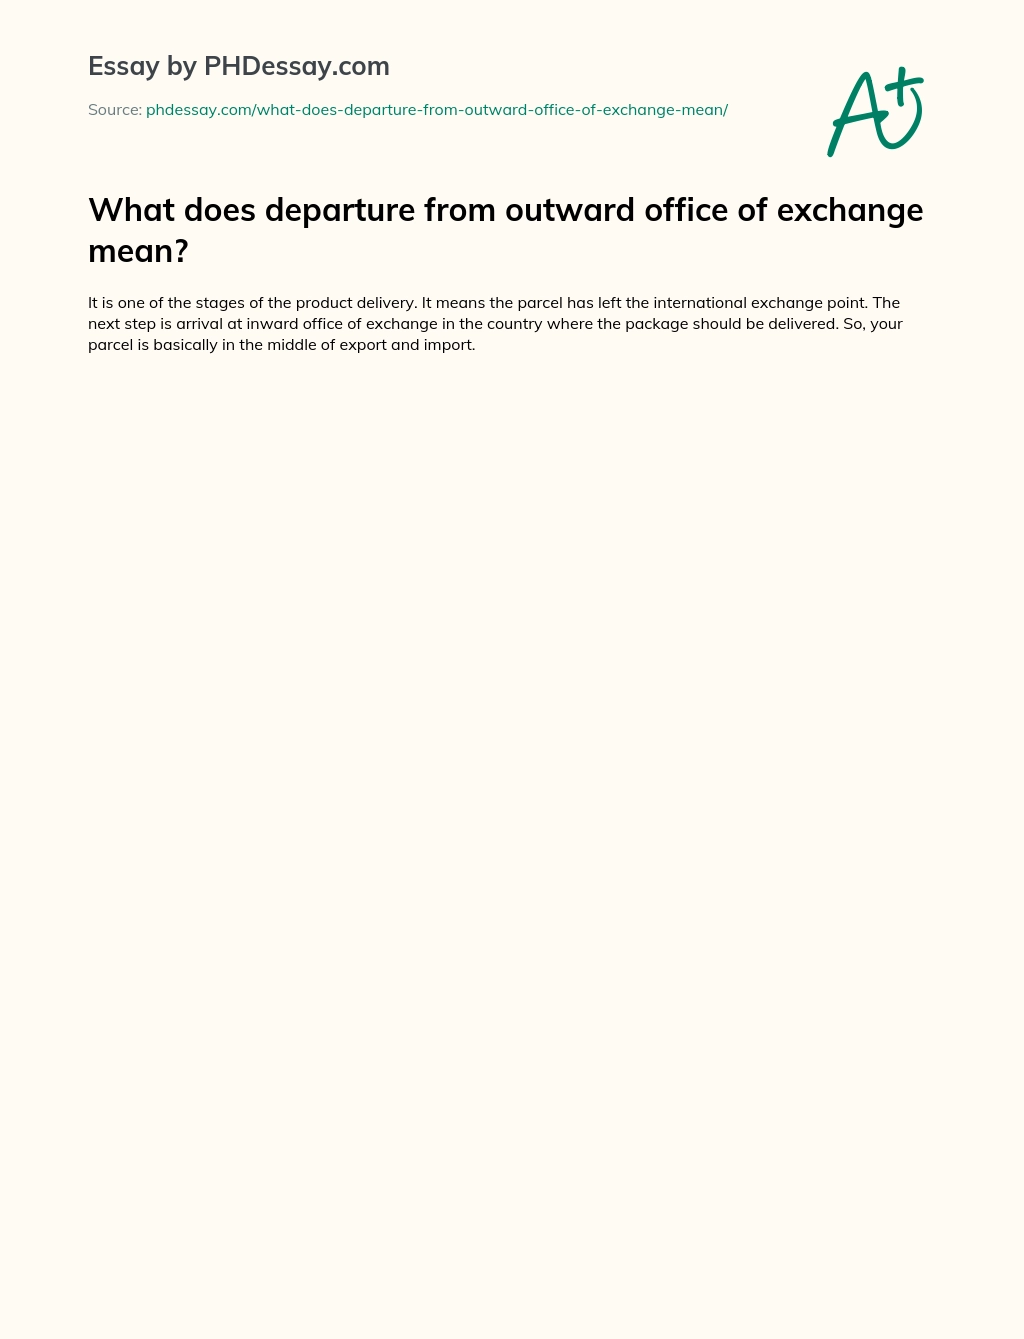 What does departure from outward office of exchange mean? essay